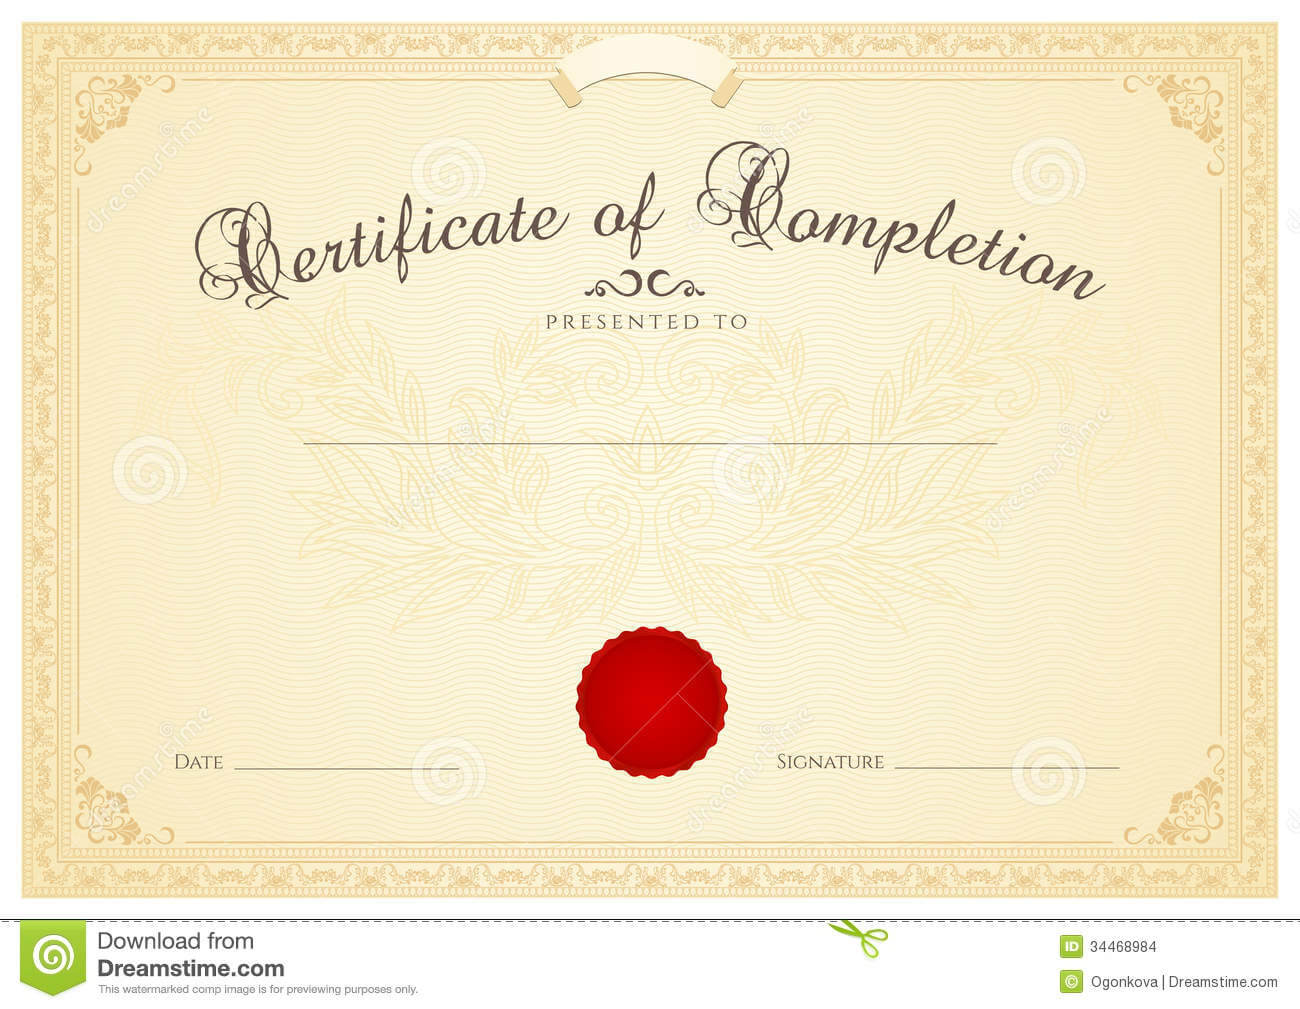 Certificate / Diploma Background Template. Floral Stock With Certificate Scroll Template